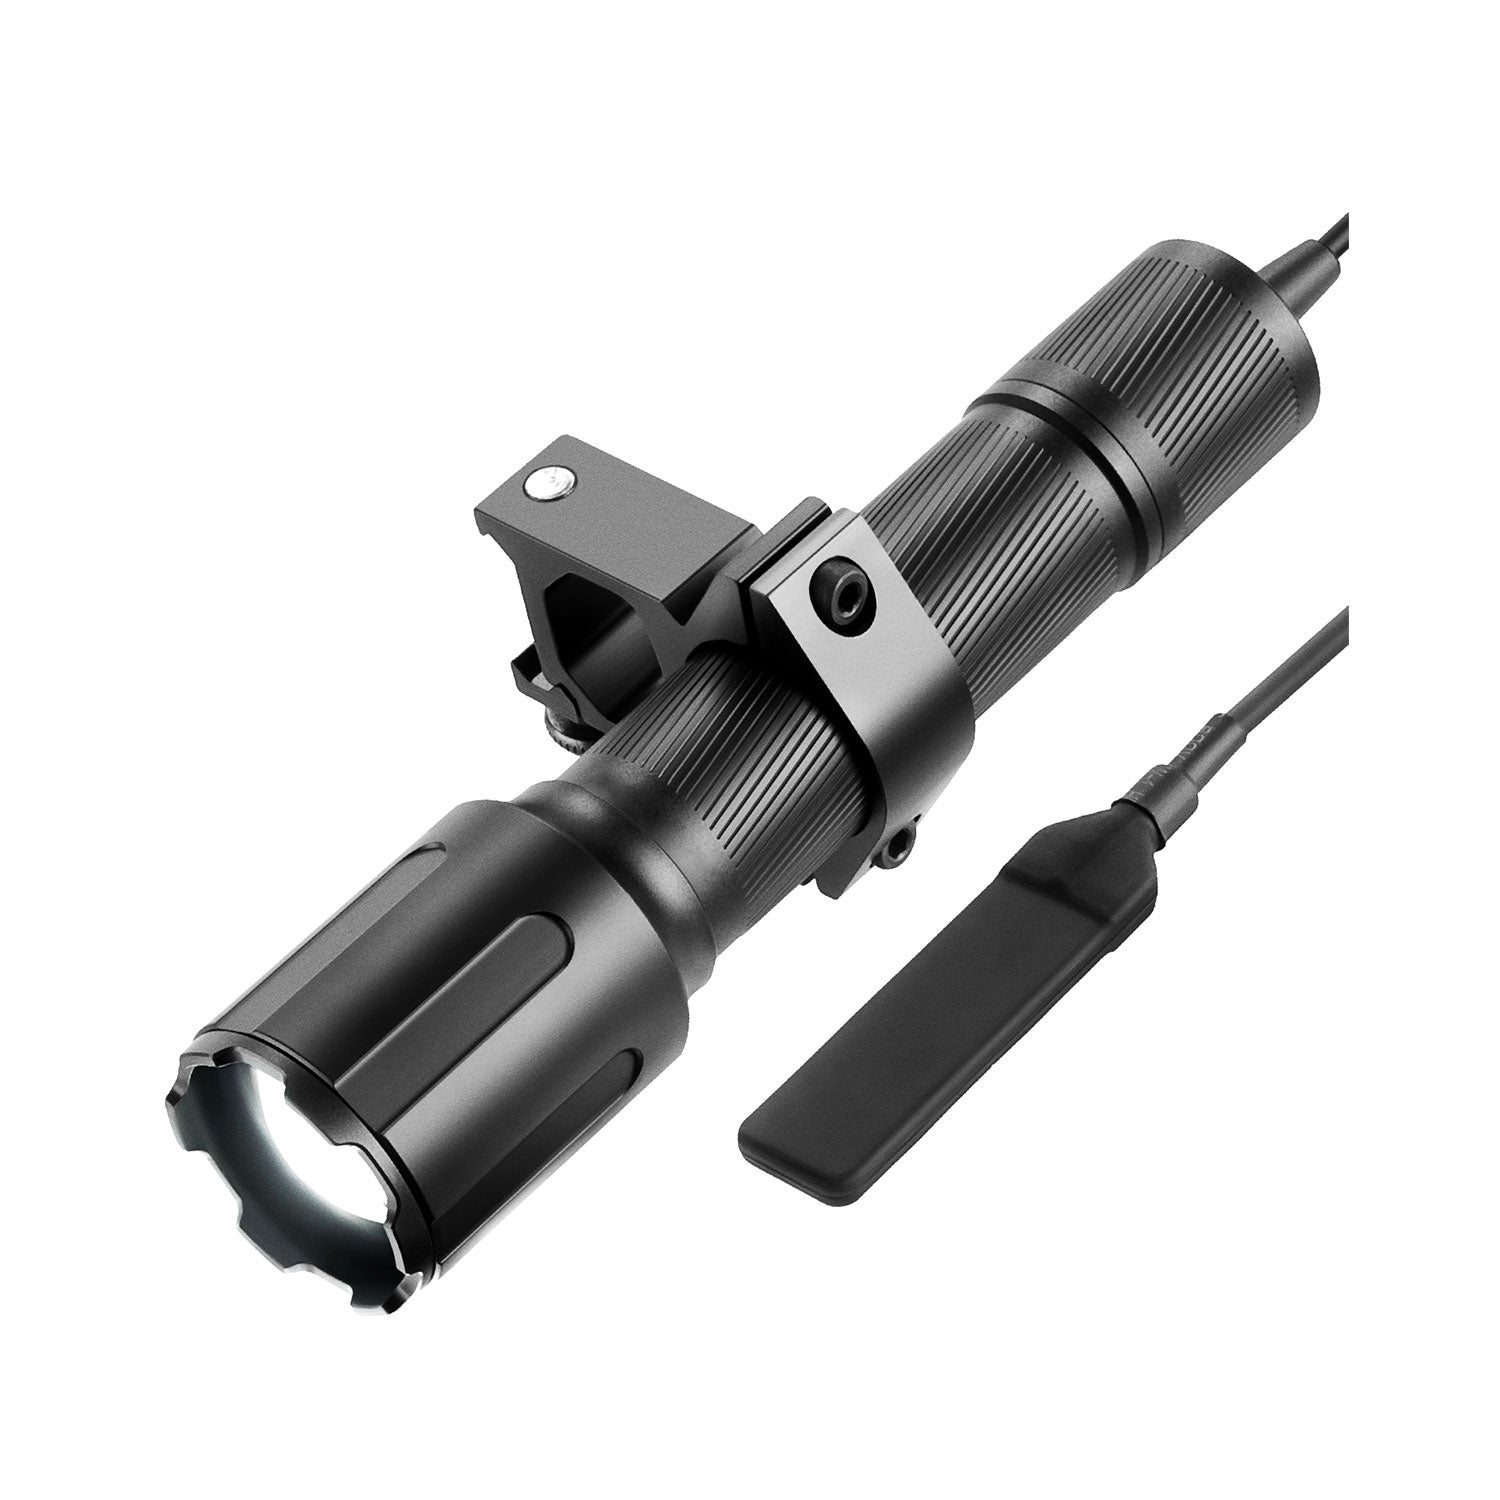 3000 Lumen Tactical Flashlight with Pressure Switch & Mounting Rings